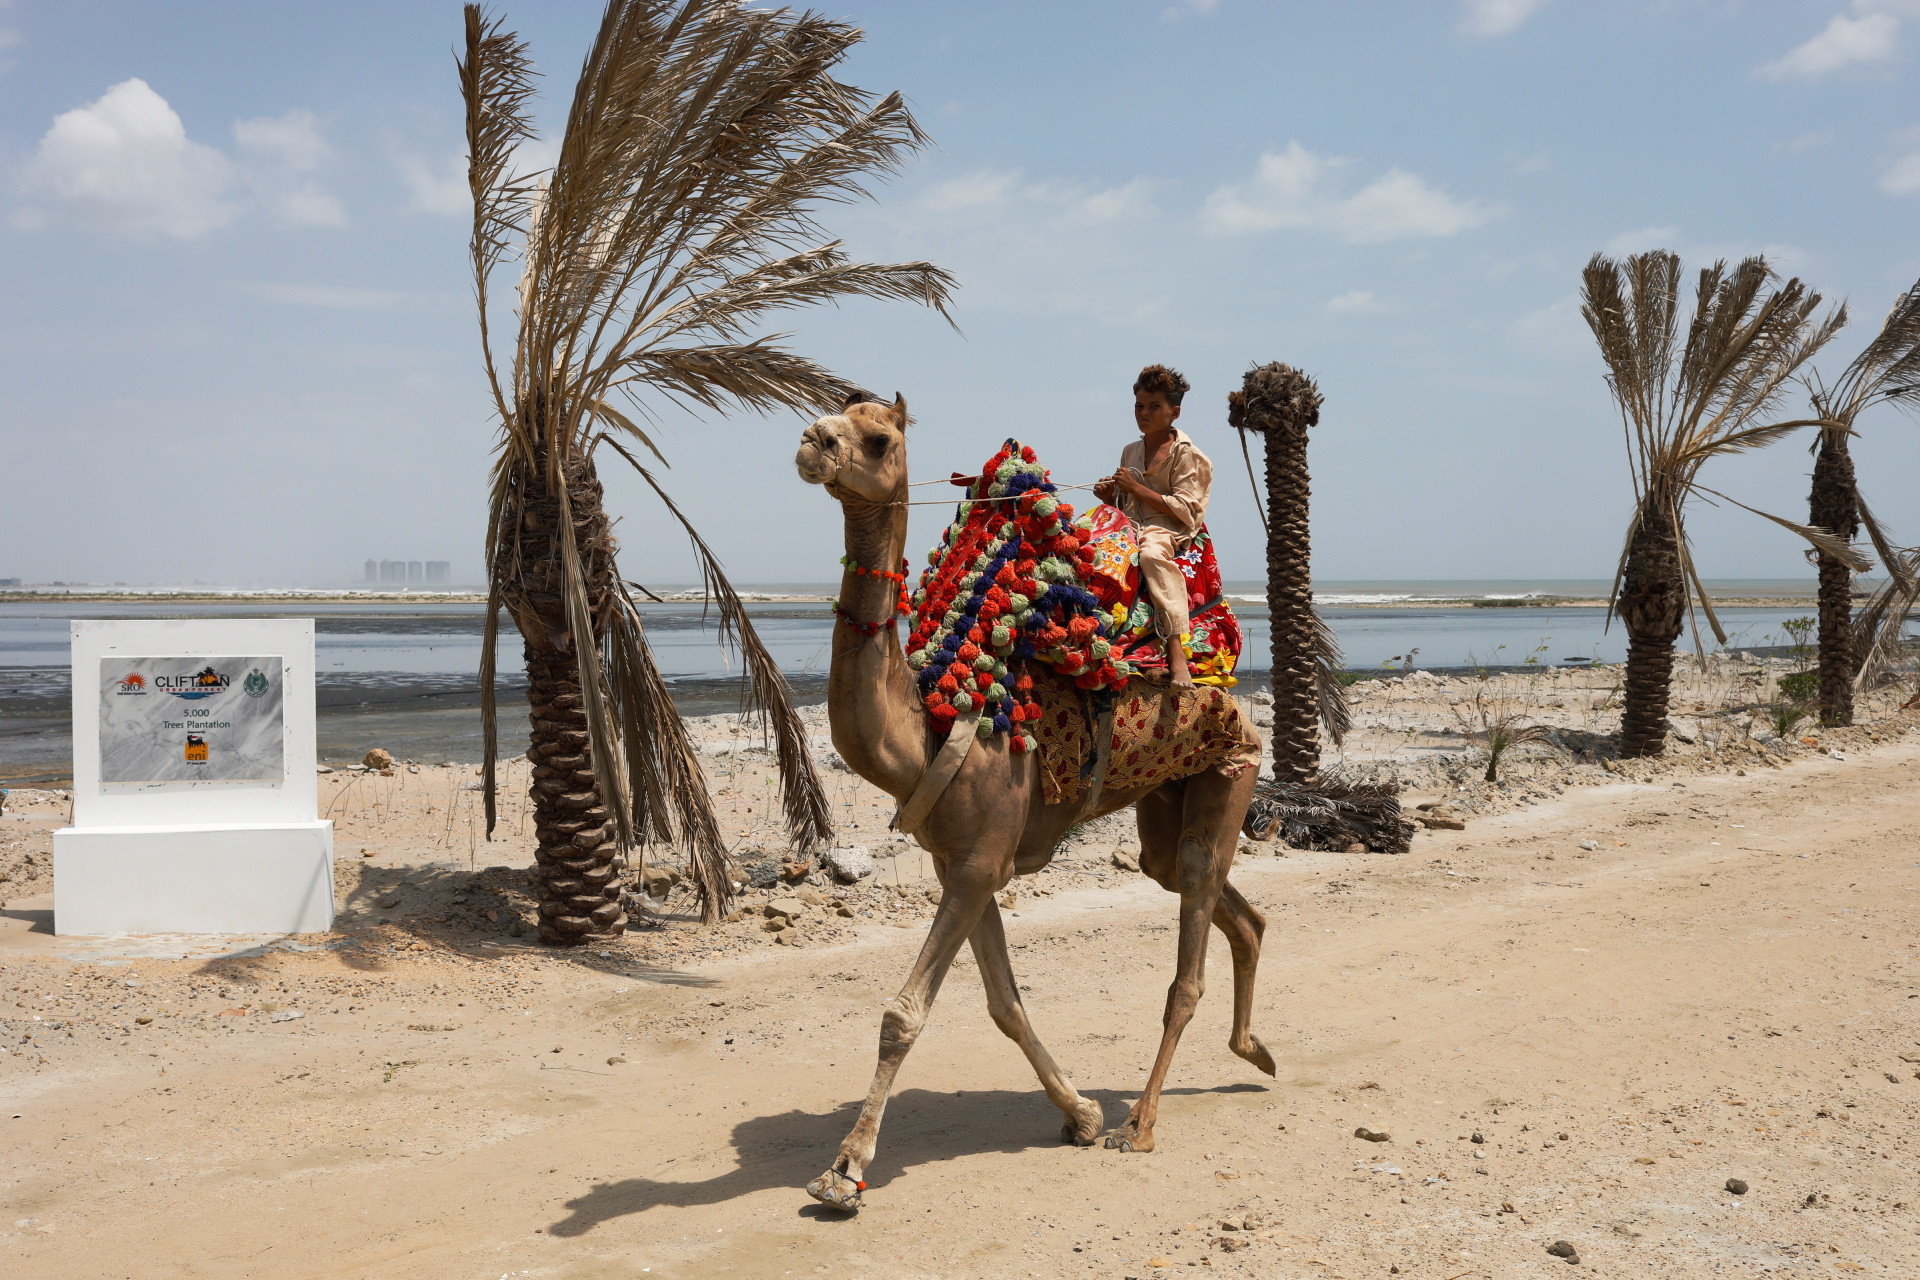 A person rides on a camel as he passes through the new plantation of palm trees at the Clifton Urban Forest, July 15, 2022. REUTERS